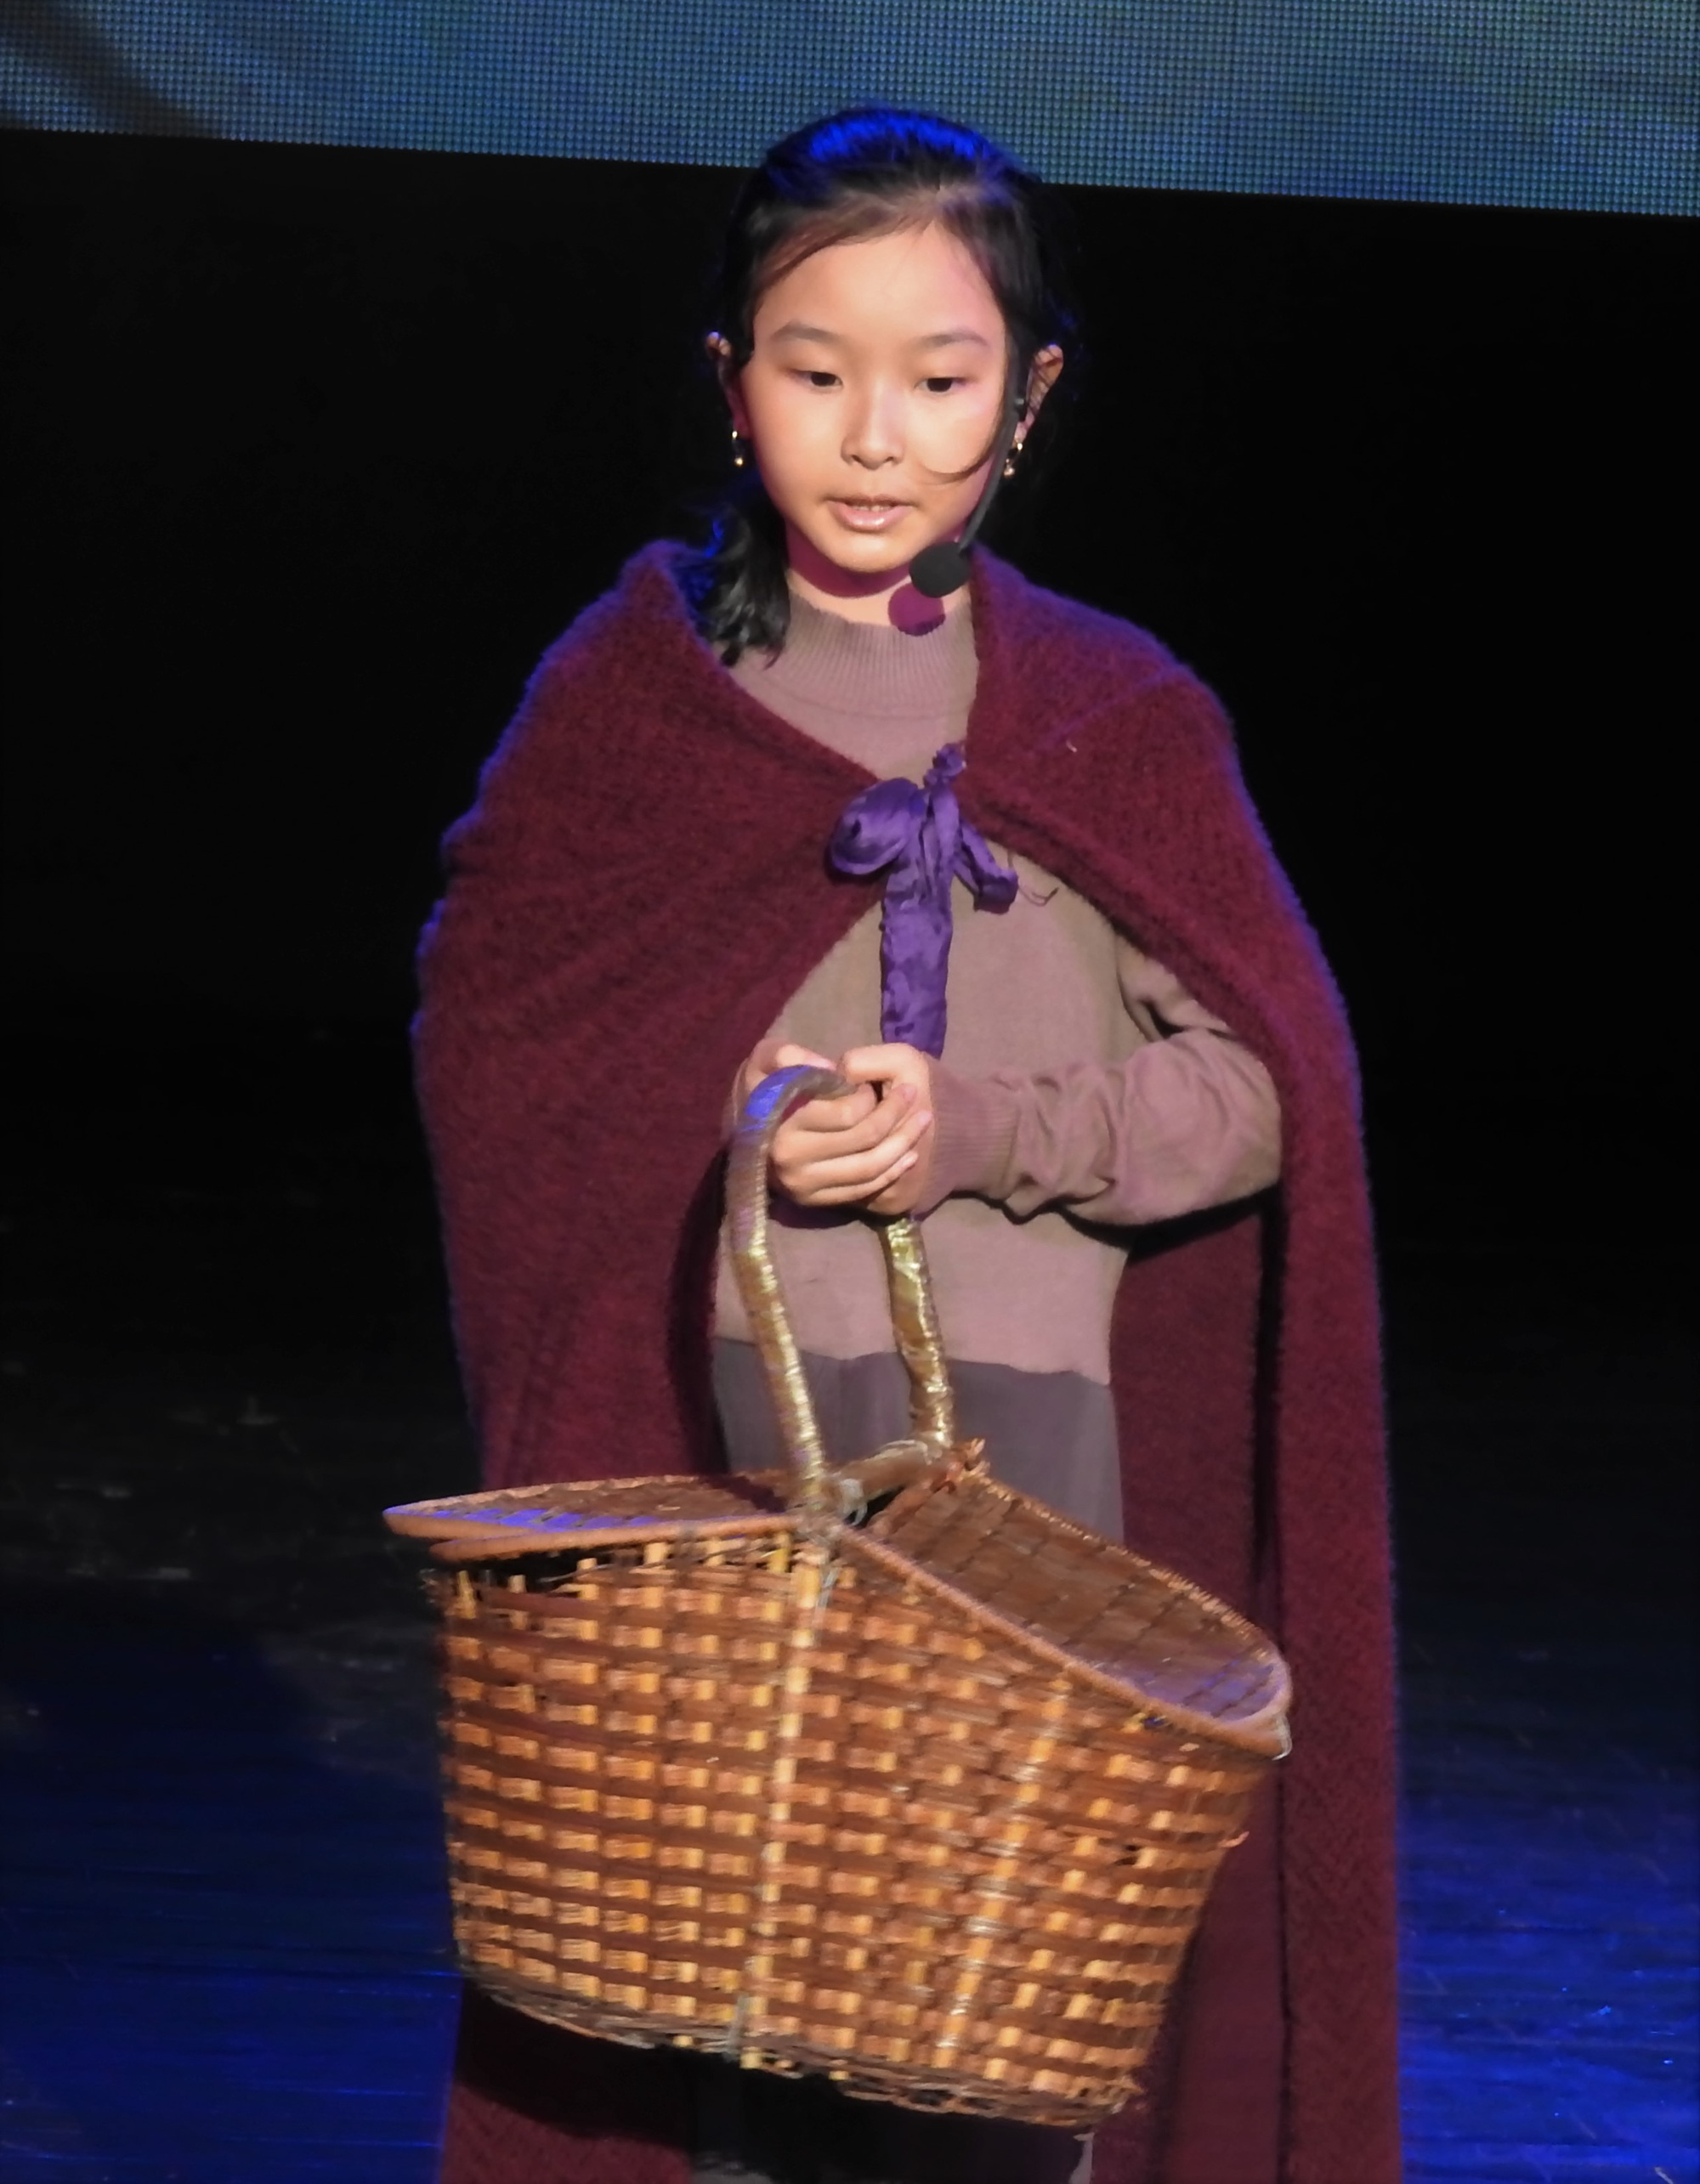 A student is seen playing the leading role in the HAY production of ‘The Little Match Girl’ in this photo captured at Tuoi Tre Theater in Hanoi, Vietnam. Photo: T. Dieu / Tuoi Tre